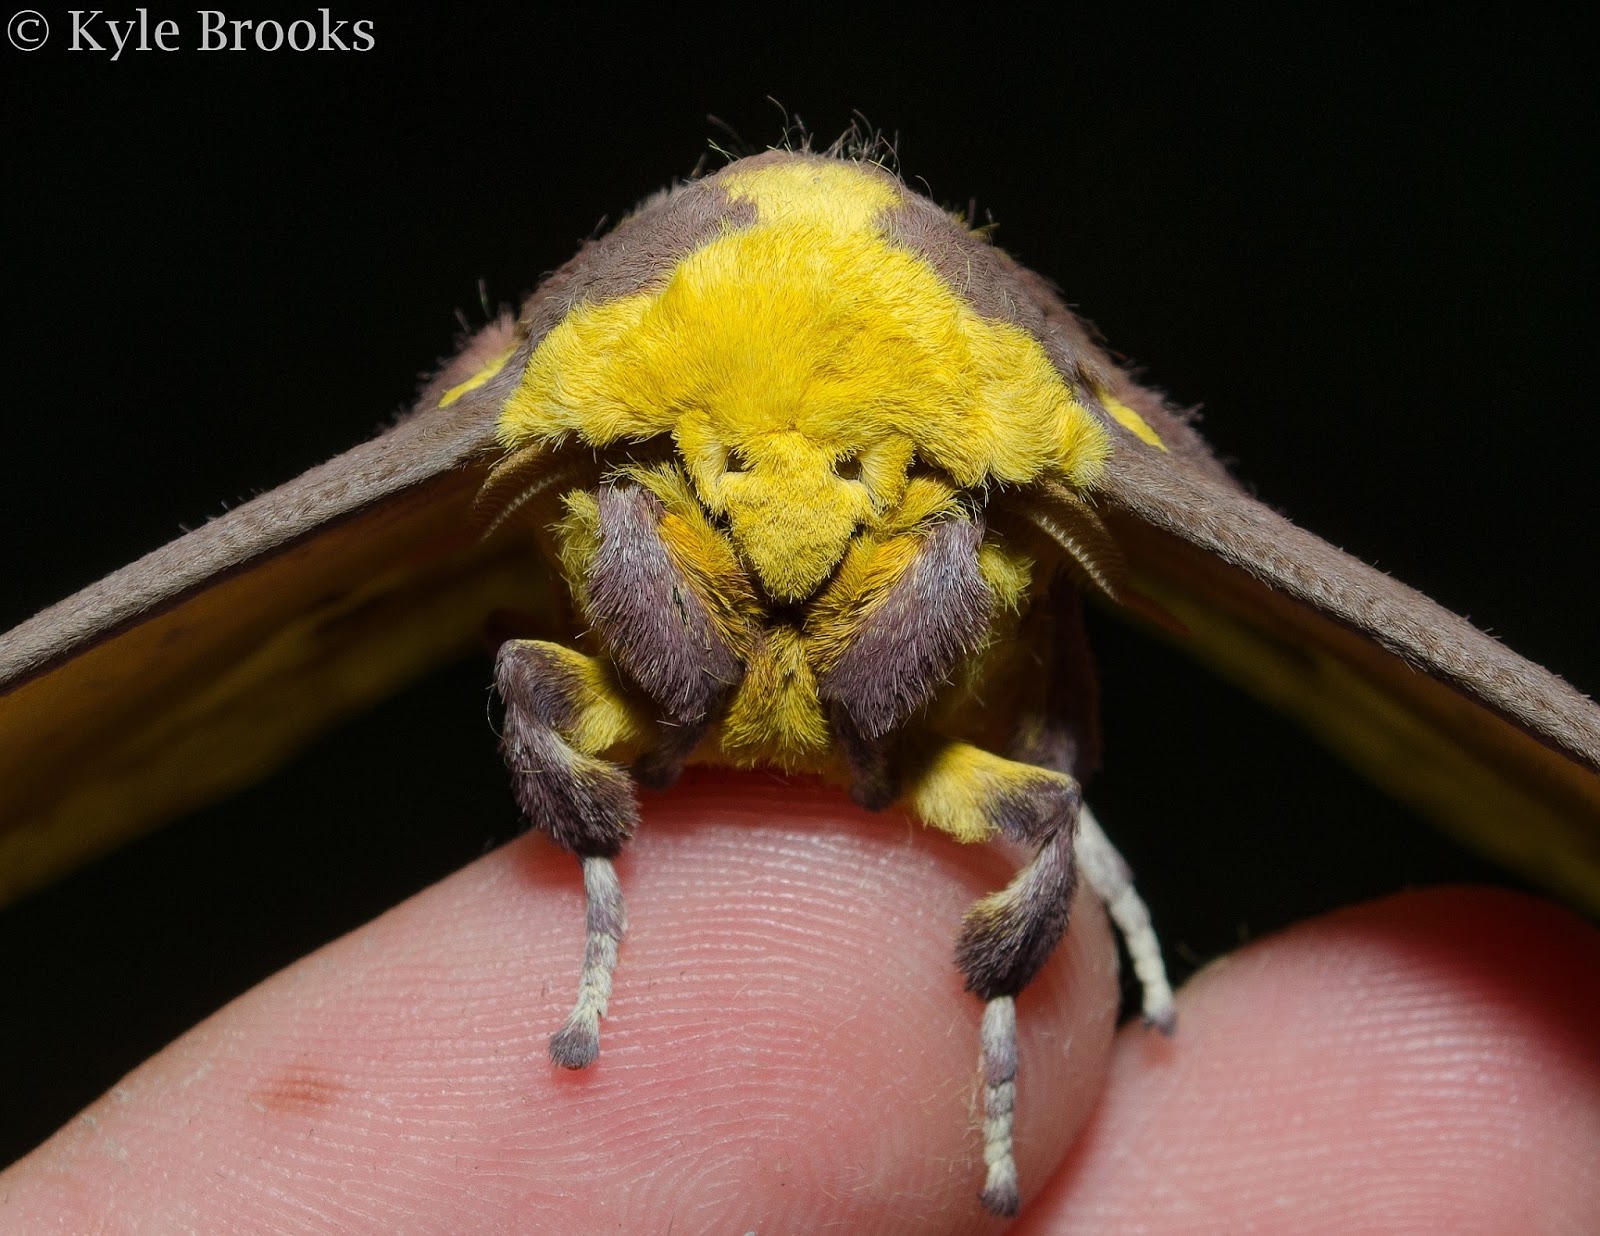 On the Subject of Nature: Imperial Moth